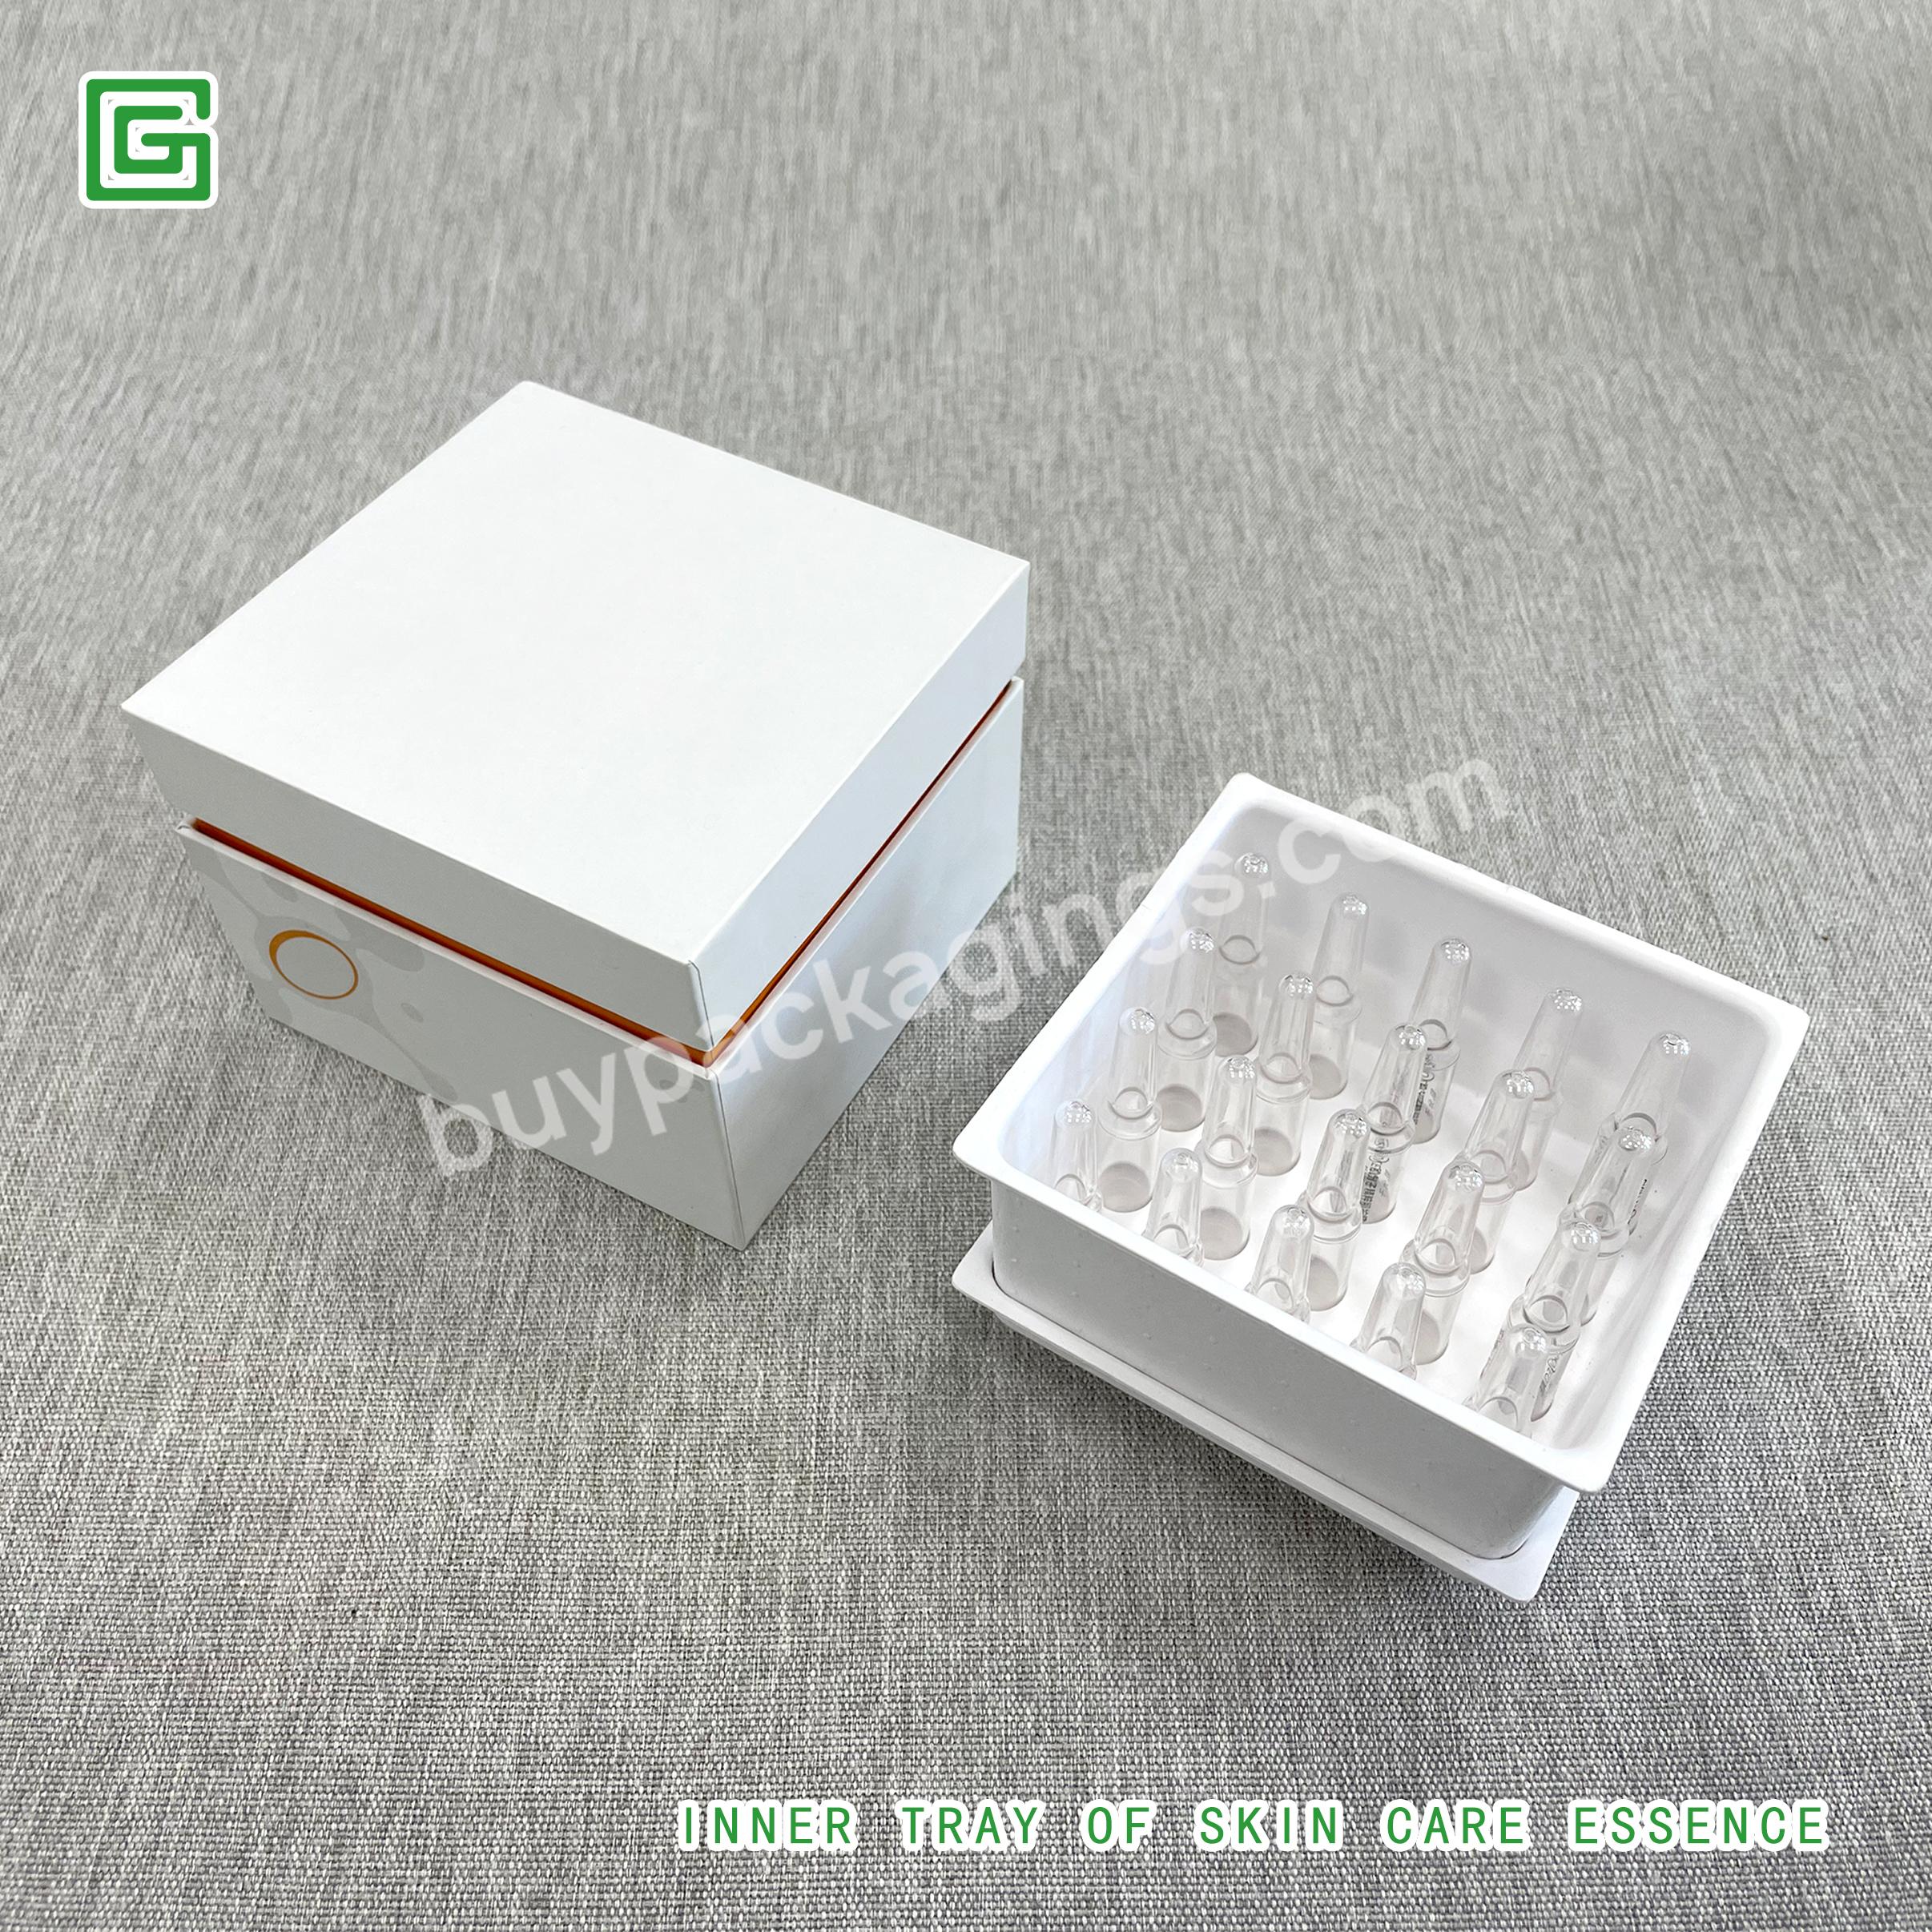 Biodegradable Custom Cosmetics For Skincare Paper Molded Pulp Square Inner Try Packaging - Buy China Suppliers Makeup Products Paper Cardboard Packaging,Skincare Product Delicate Boxes,Black White Pulp Molded Paper Skincare Packaging Tray Insert.